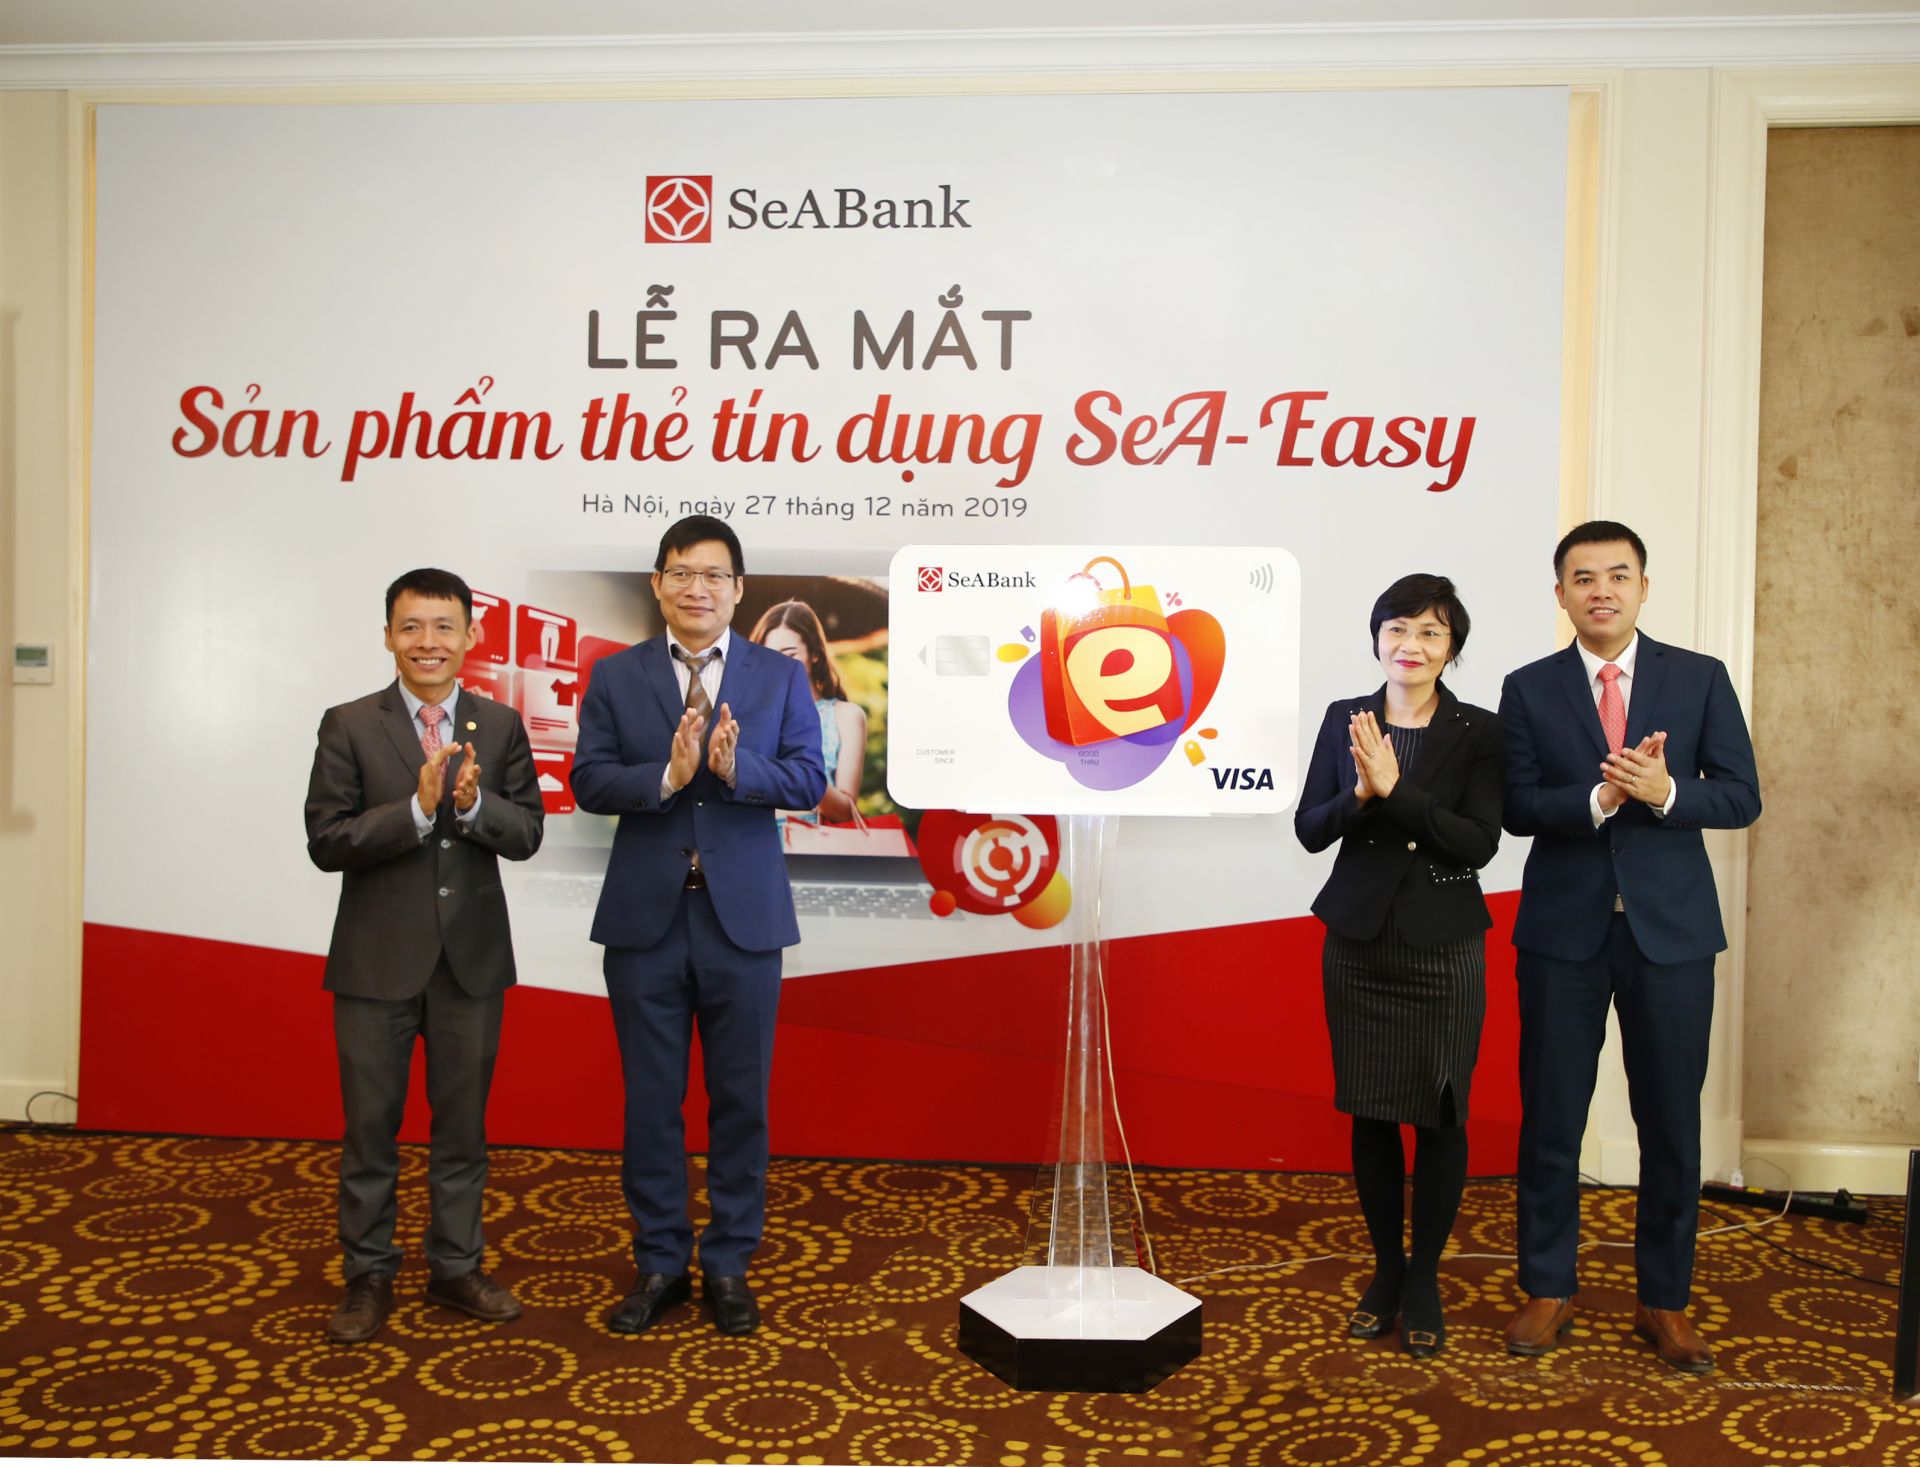 seabank launched new sea easy credit card with refunding feature of up to 8